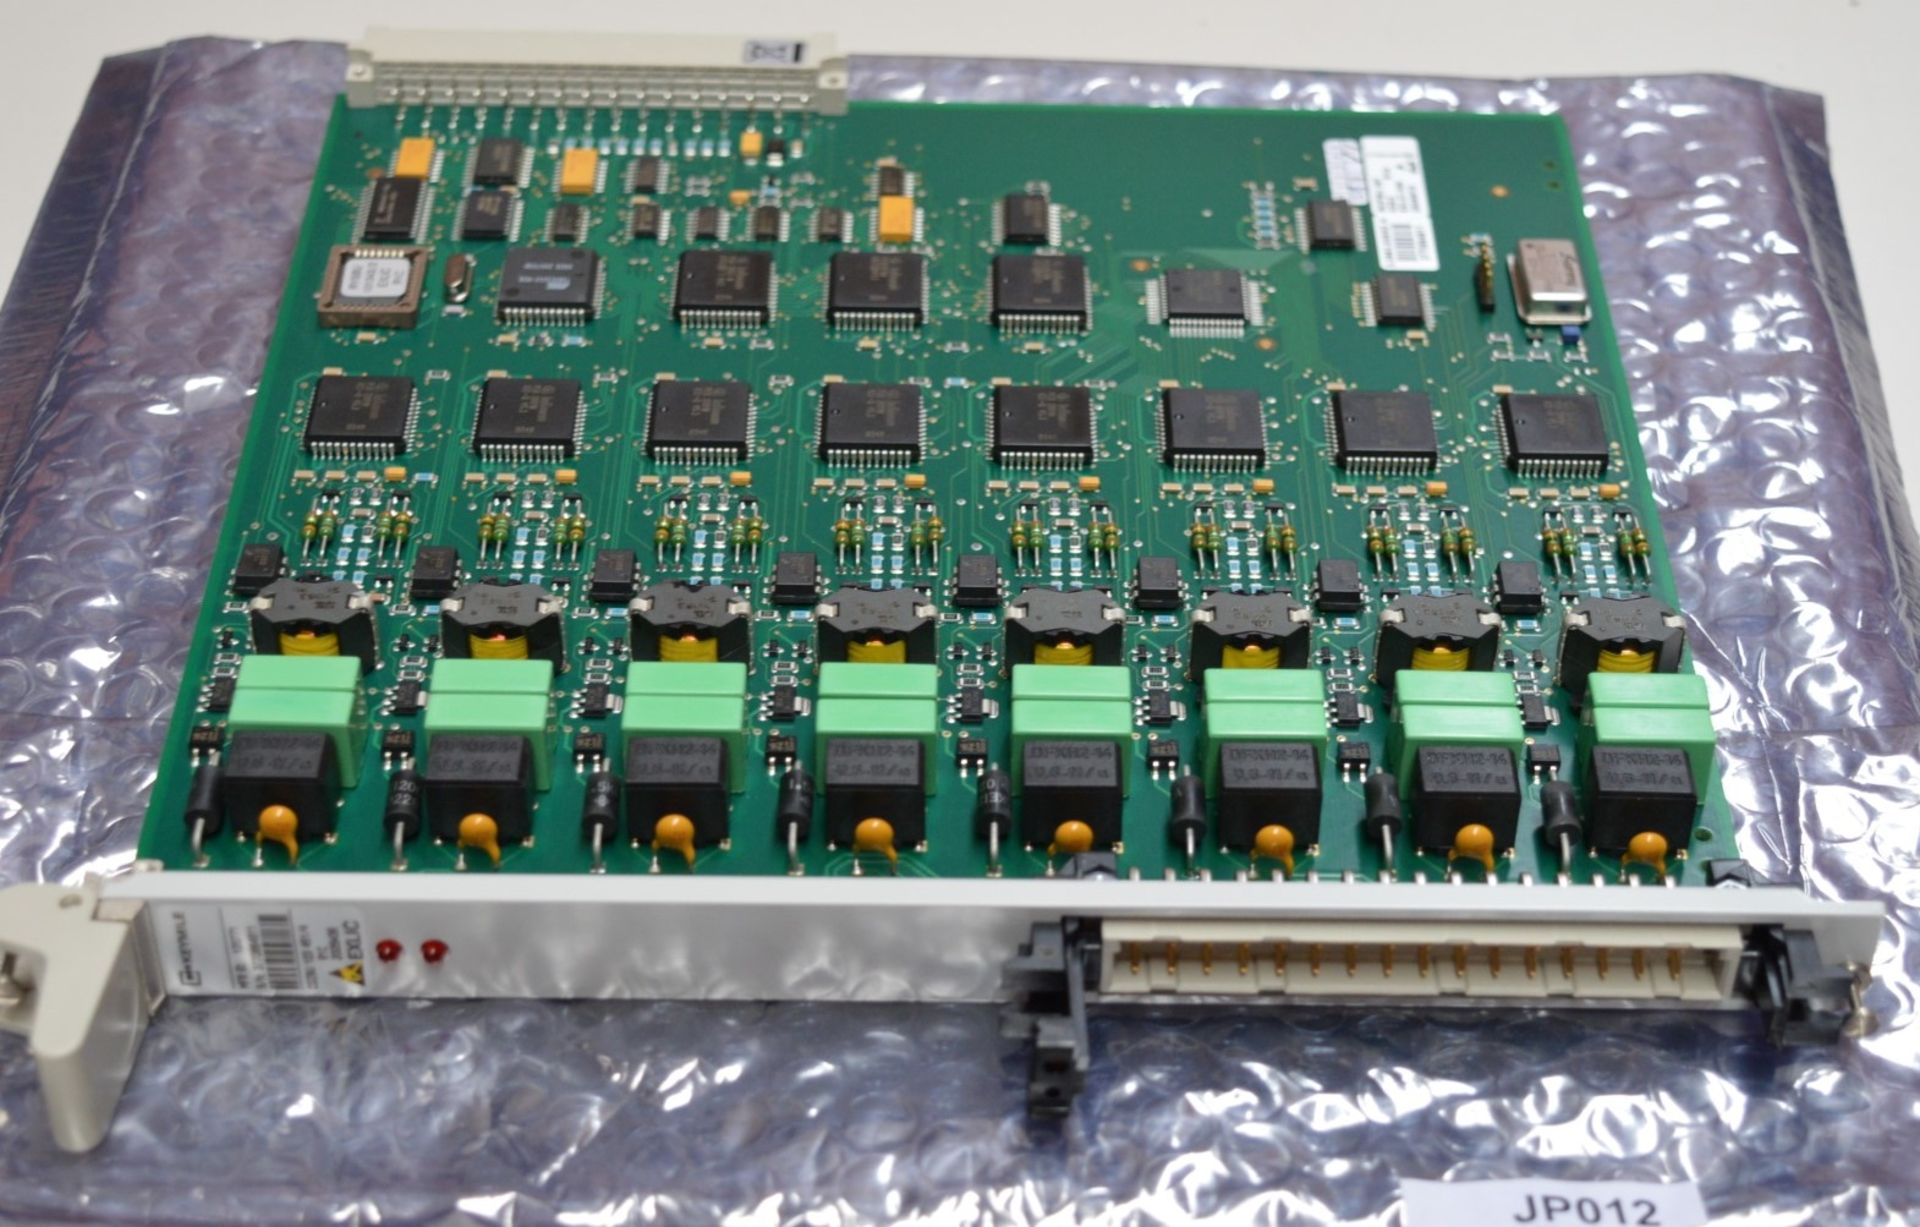 1 x Keymile 120771 Exlic Module Board - Replacement Telecommunications Part - CL300 - Ref JP012 - Lo - Image 6 of 6